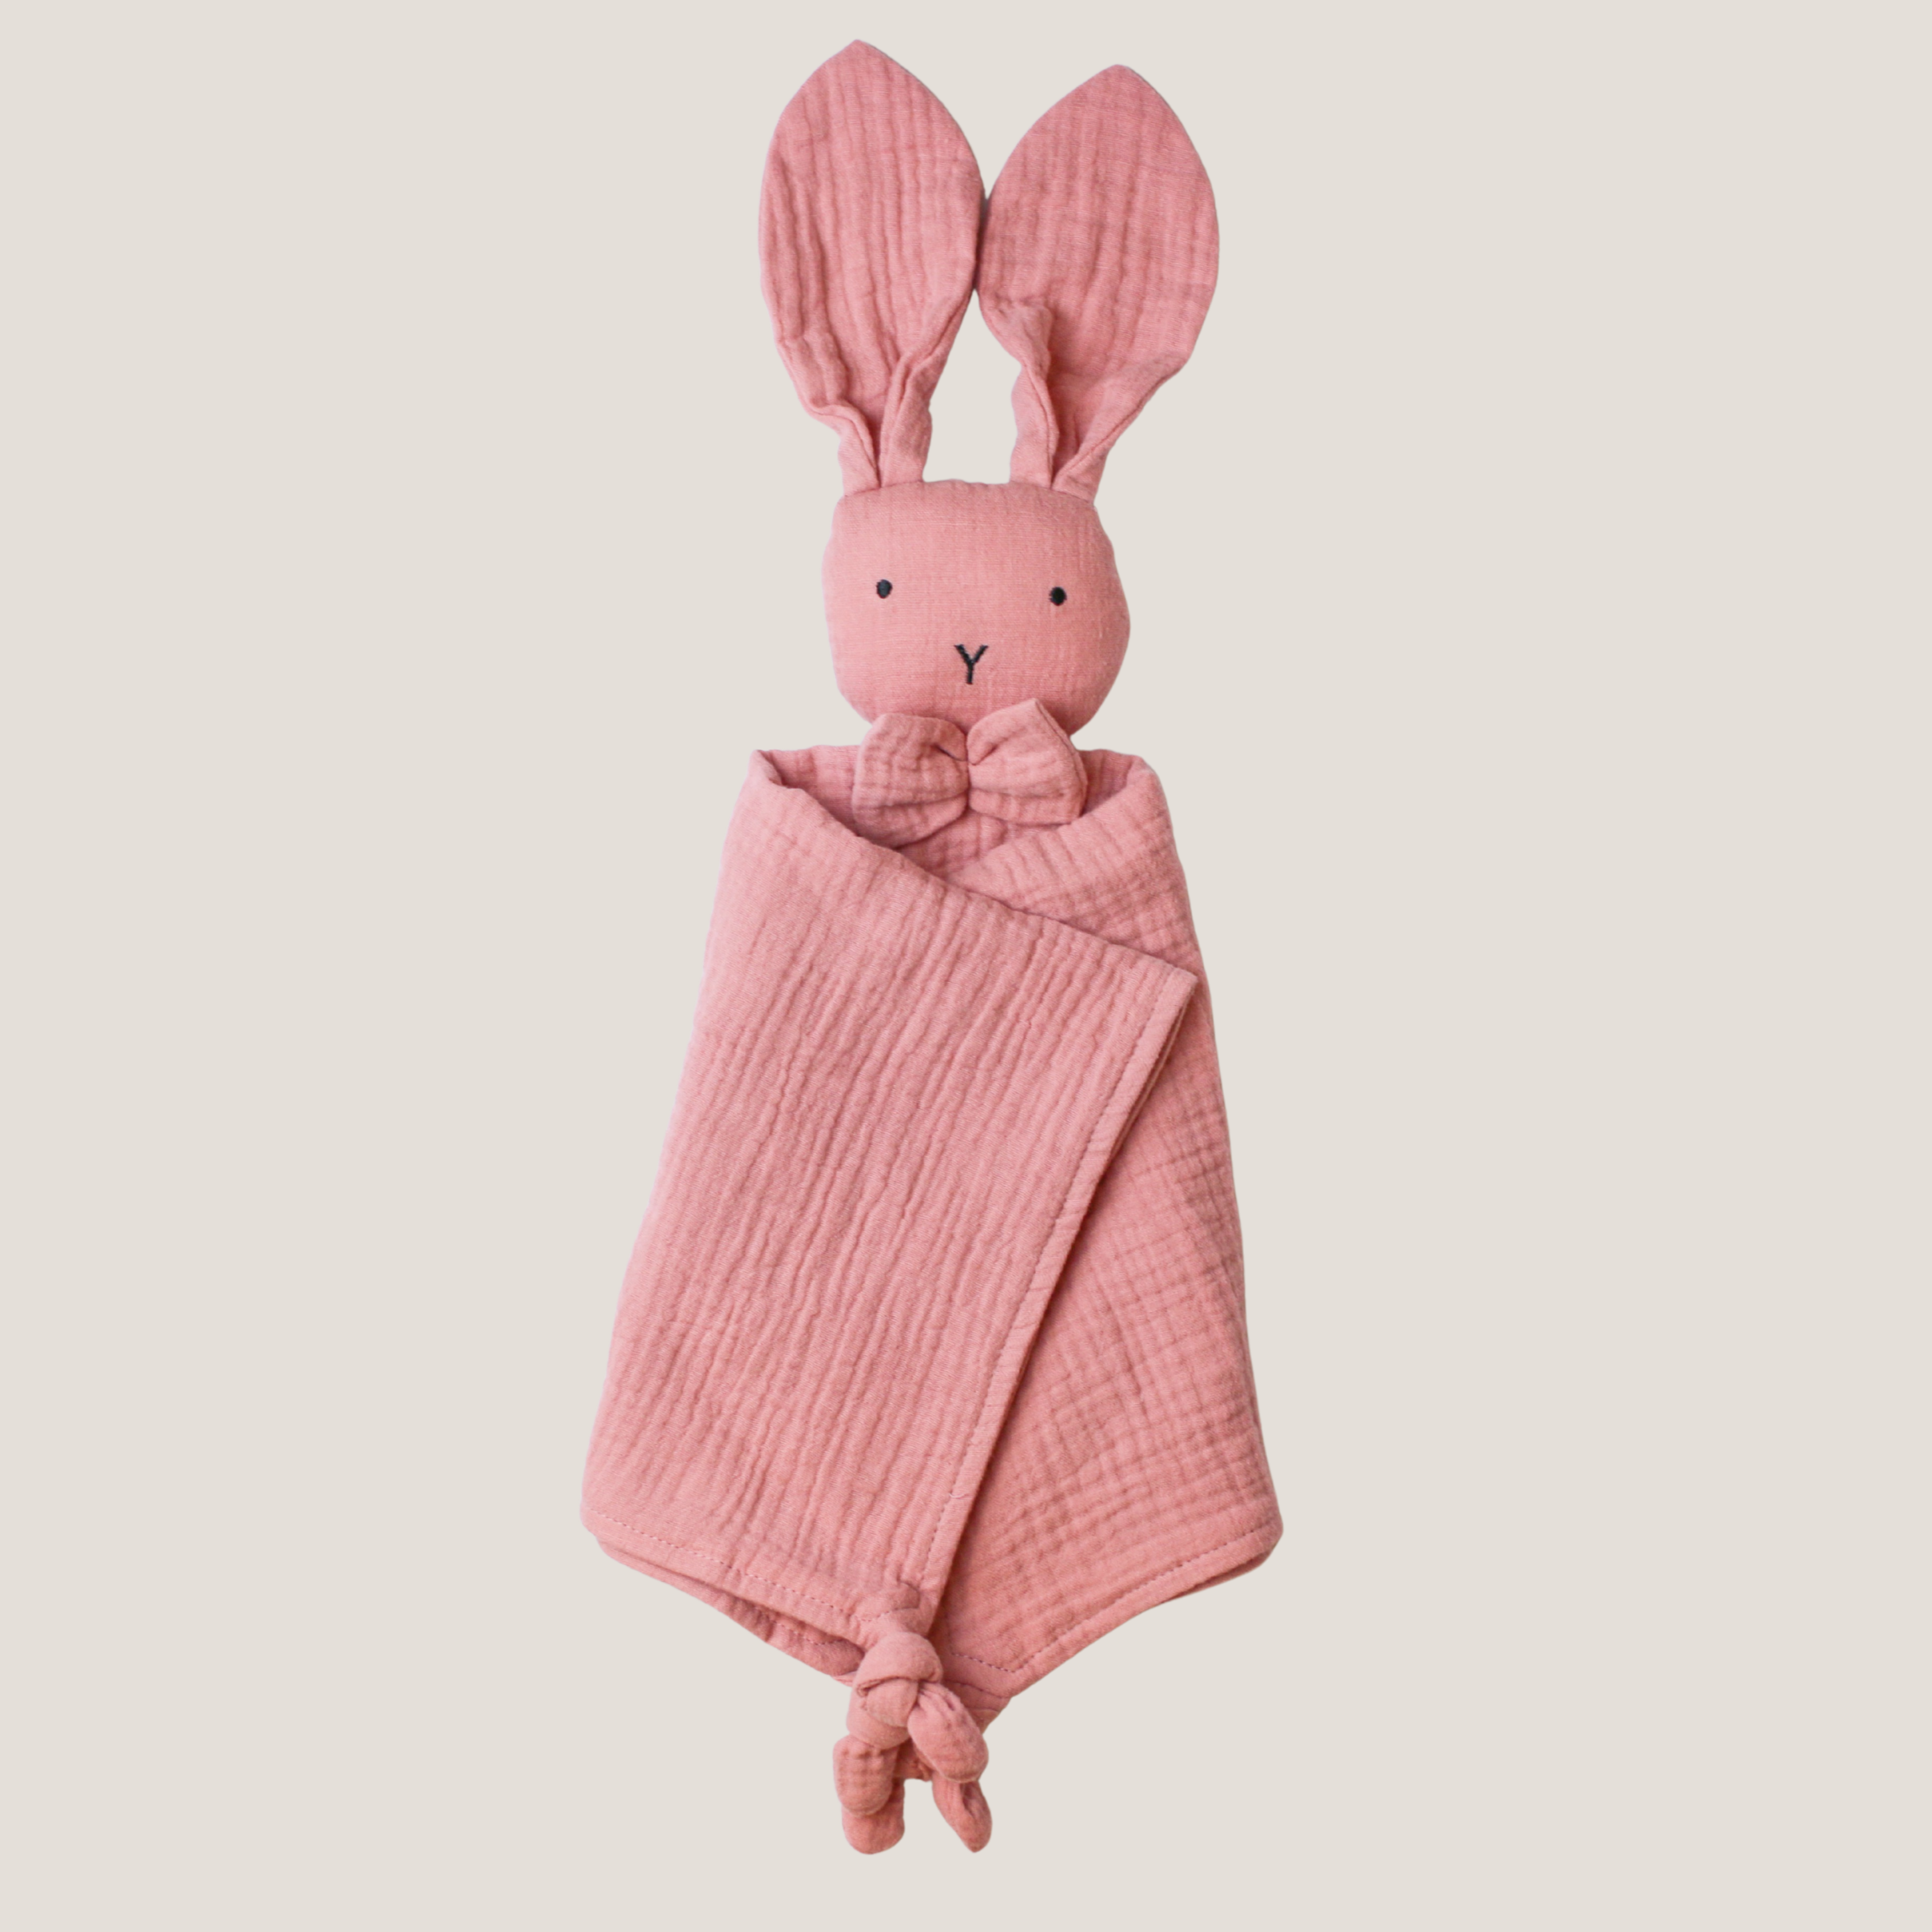 Snuggly Bunny Comforter in Dusty Pink